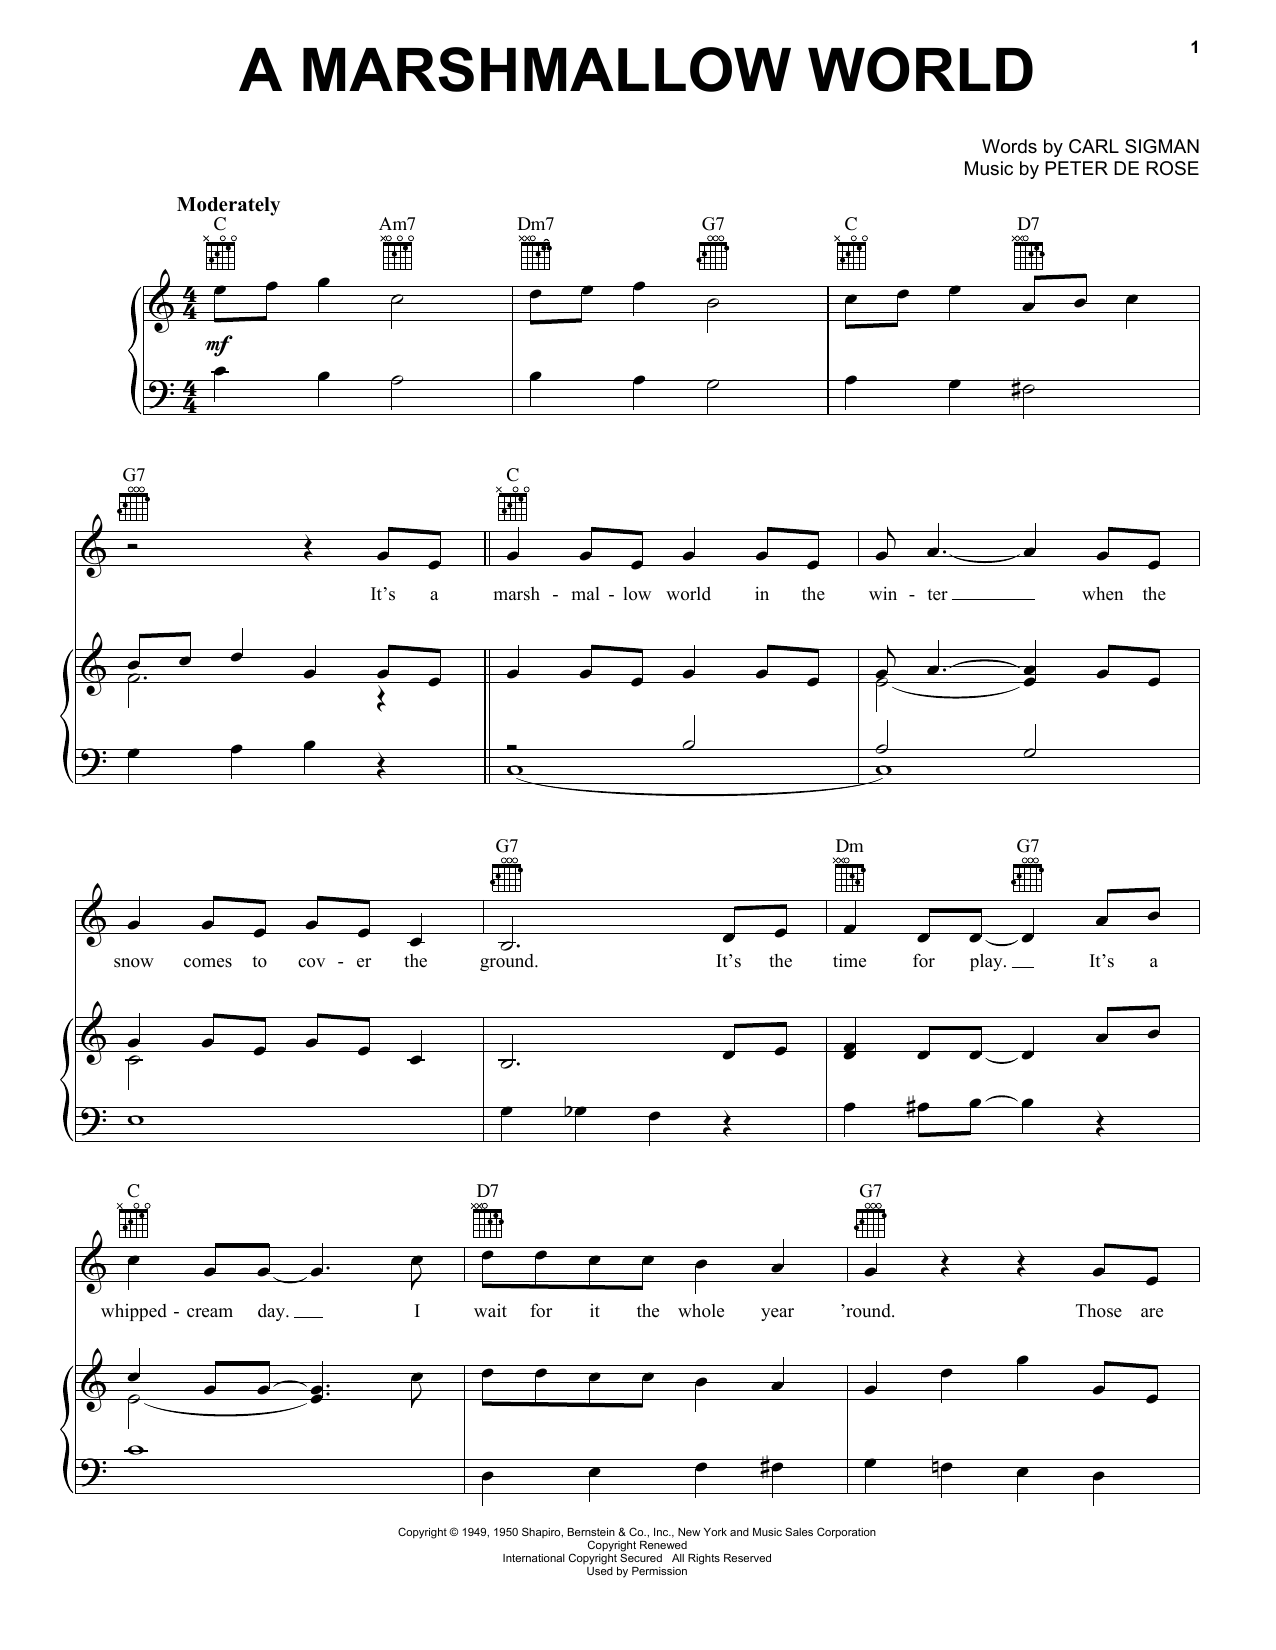 Carl Sigman & Peter De Rose A Marshmallow World sheet music notes and chords. Download Printable PDF.